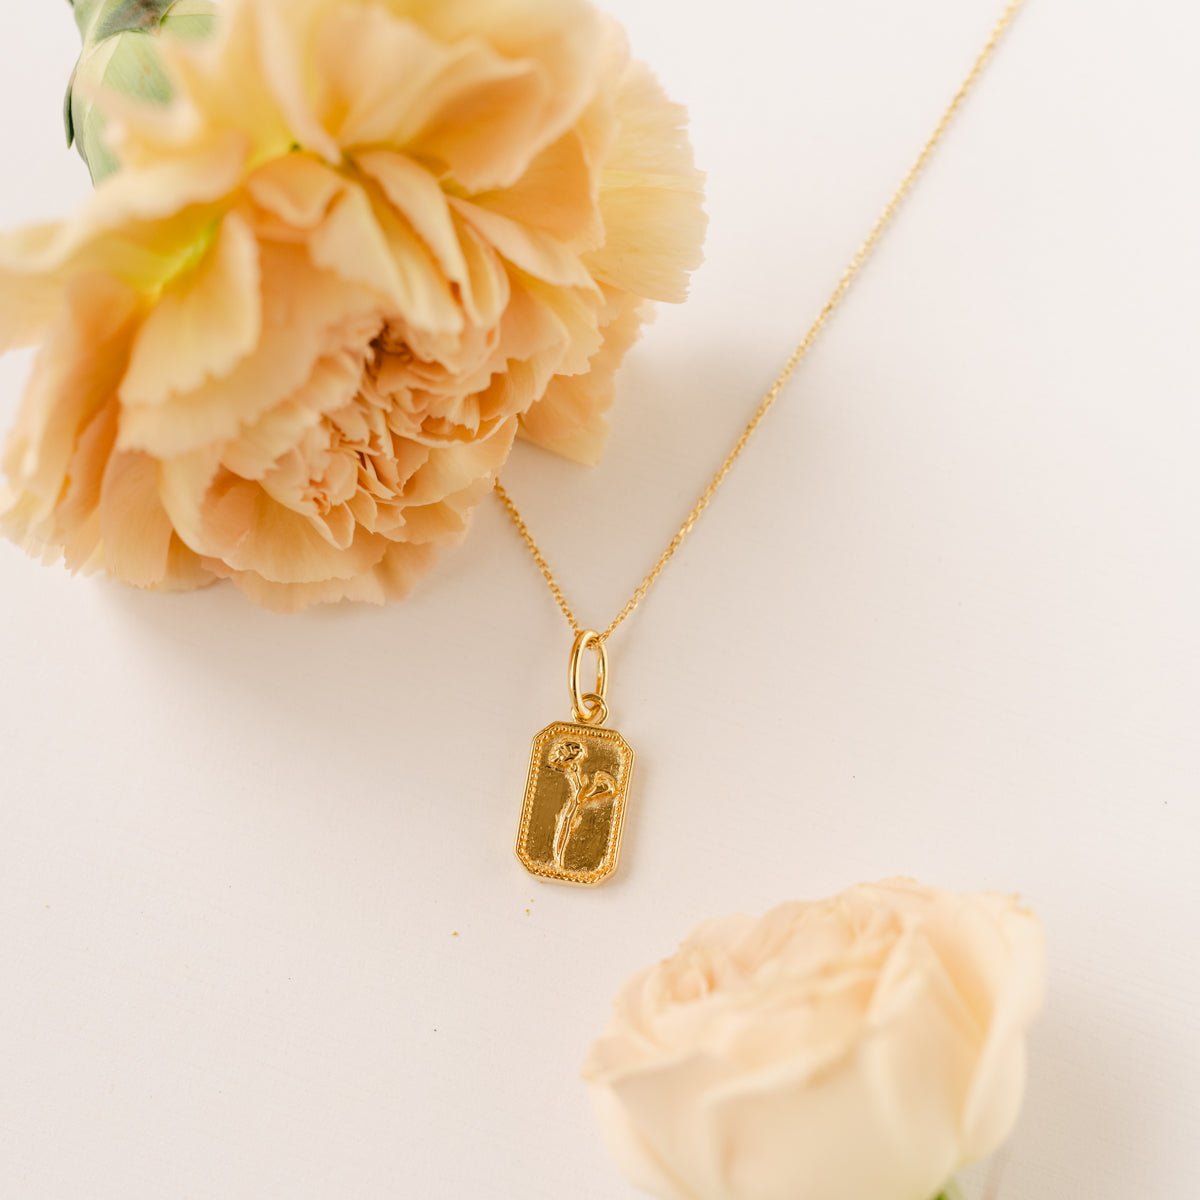 FRAICHE INSPIRE JANUARY BIRTH FLOWER NECKLACE - CARNATION - SO PRETTY CARA COTTER